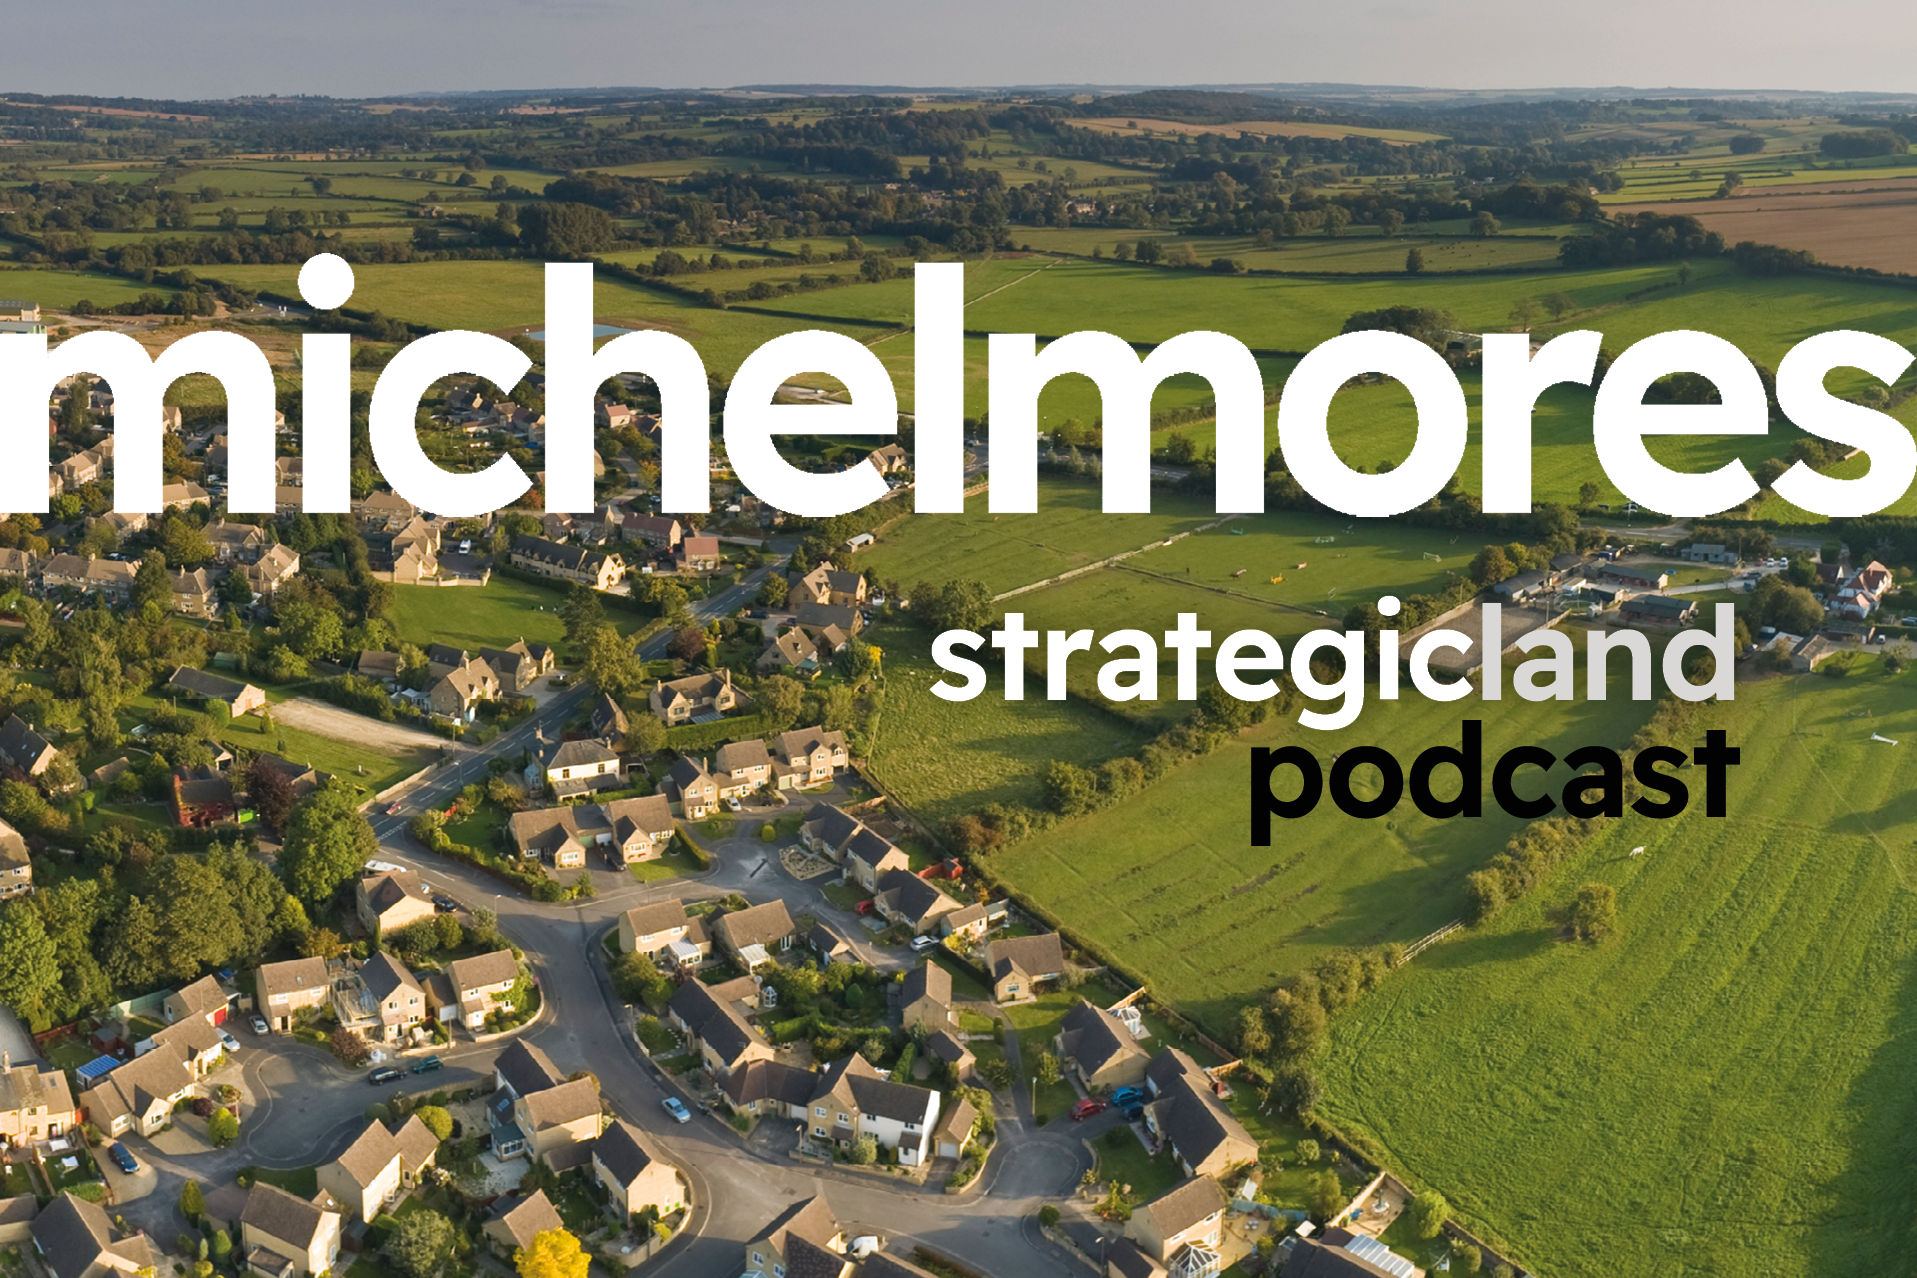 Strategic Land Podcast | episode 1: Tax issues relating to Strategic Land ownership